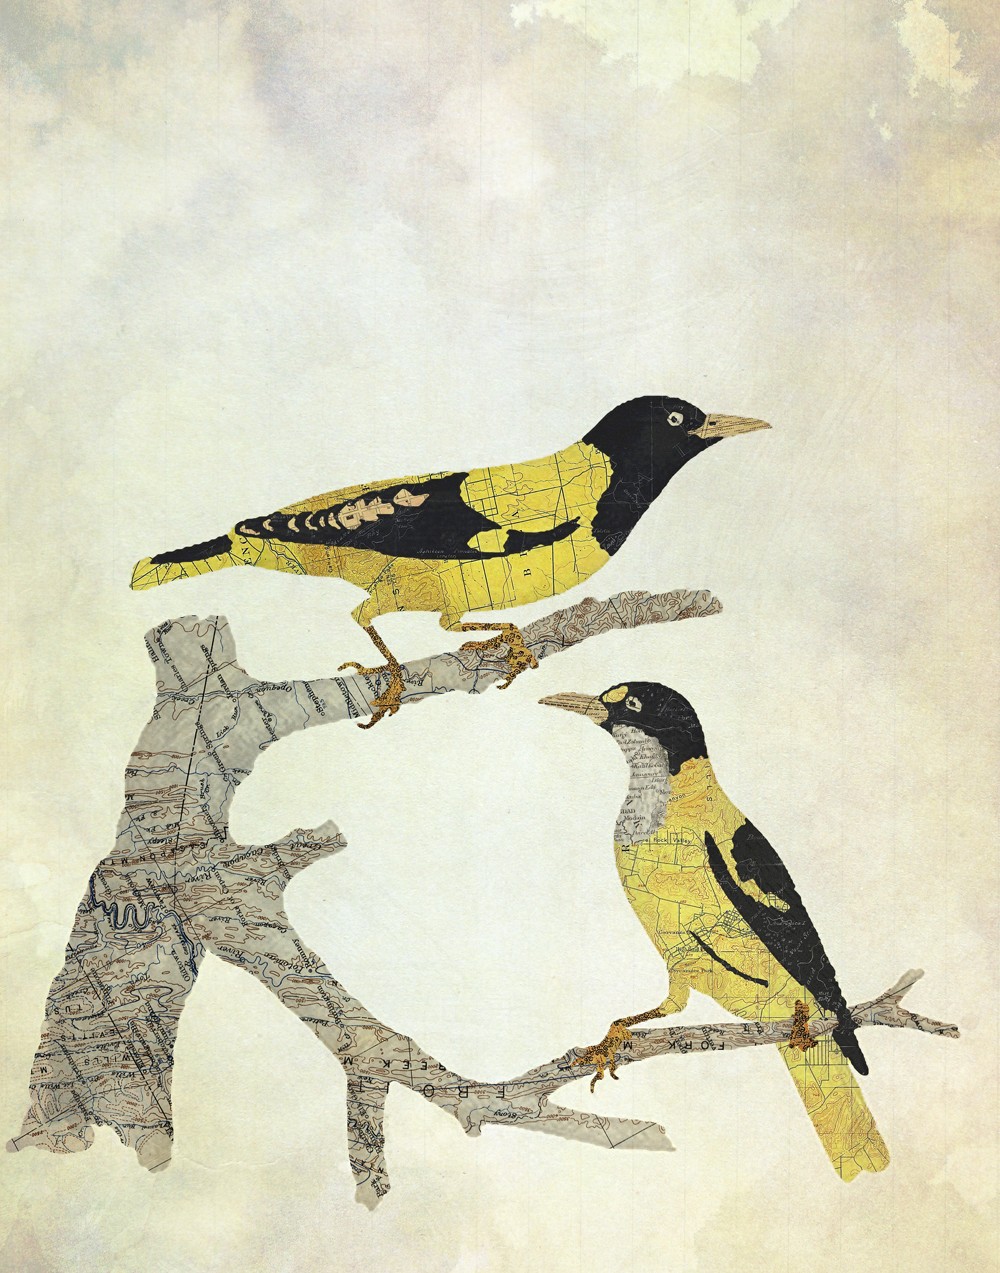 06-Goldfinches-Jason-LaFerrera-Cartography-Shaped-to-make-Map-Animals-www-designstack-co